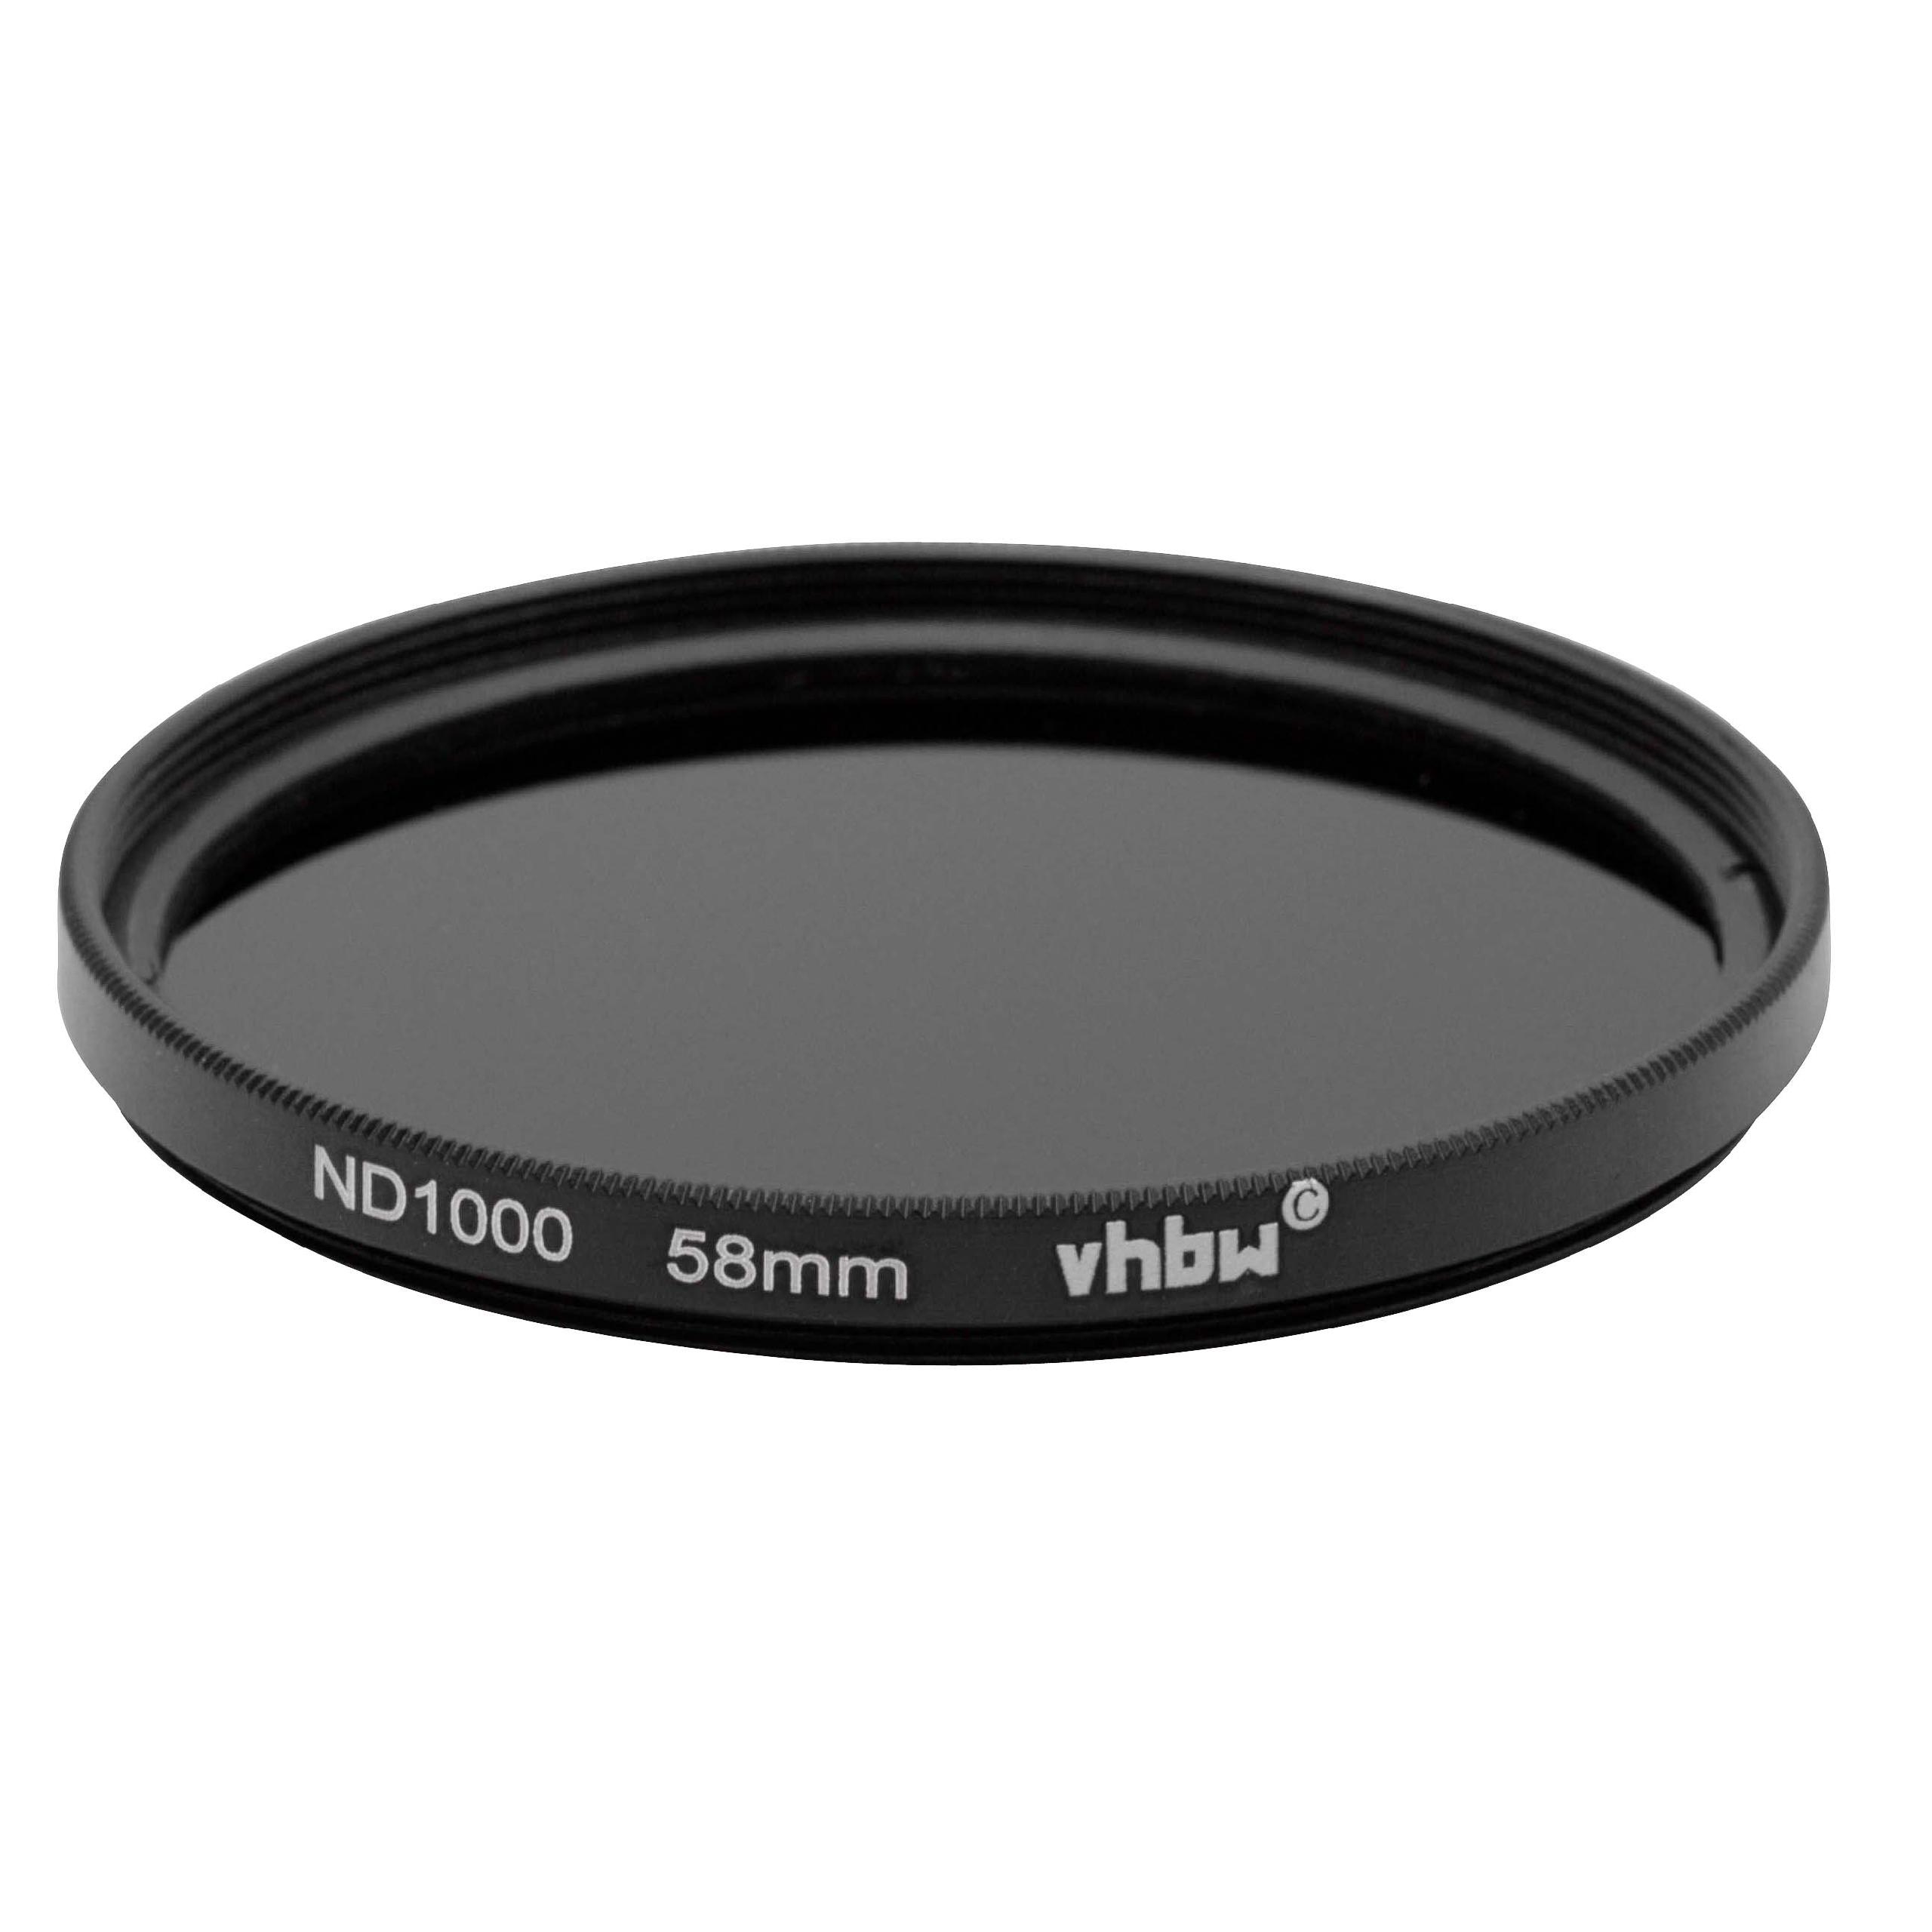 Universal ND Filter ND 1000 suitable for Camera Lenses with 58 mm Filter Thread - Grey Filter